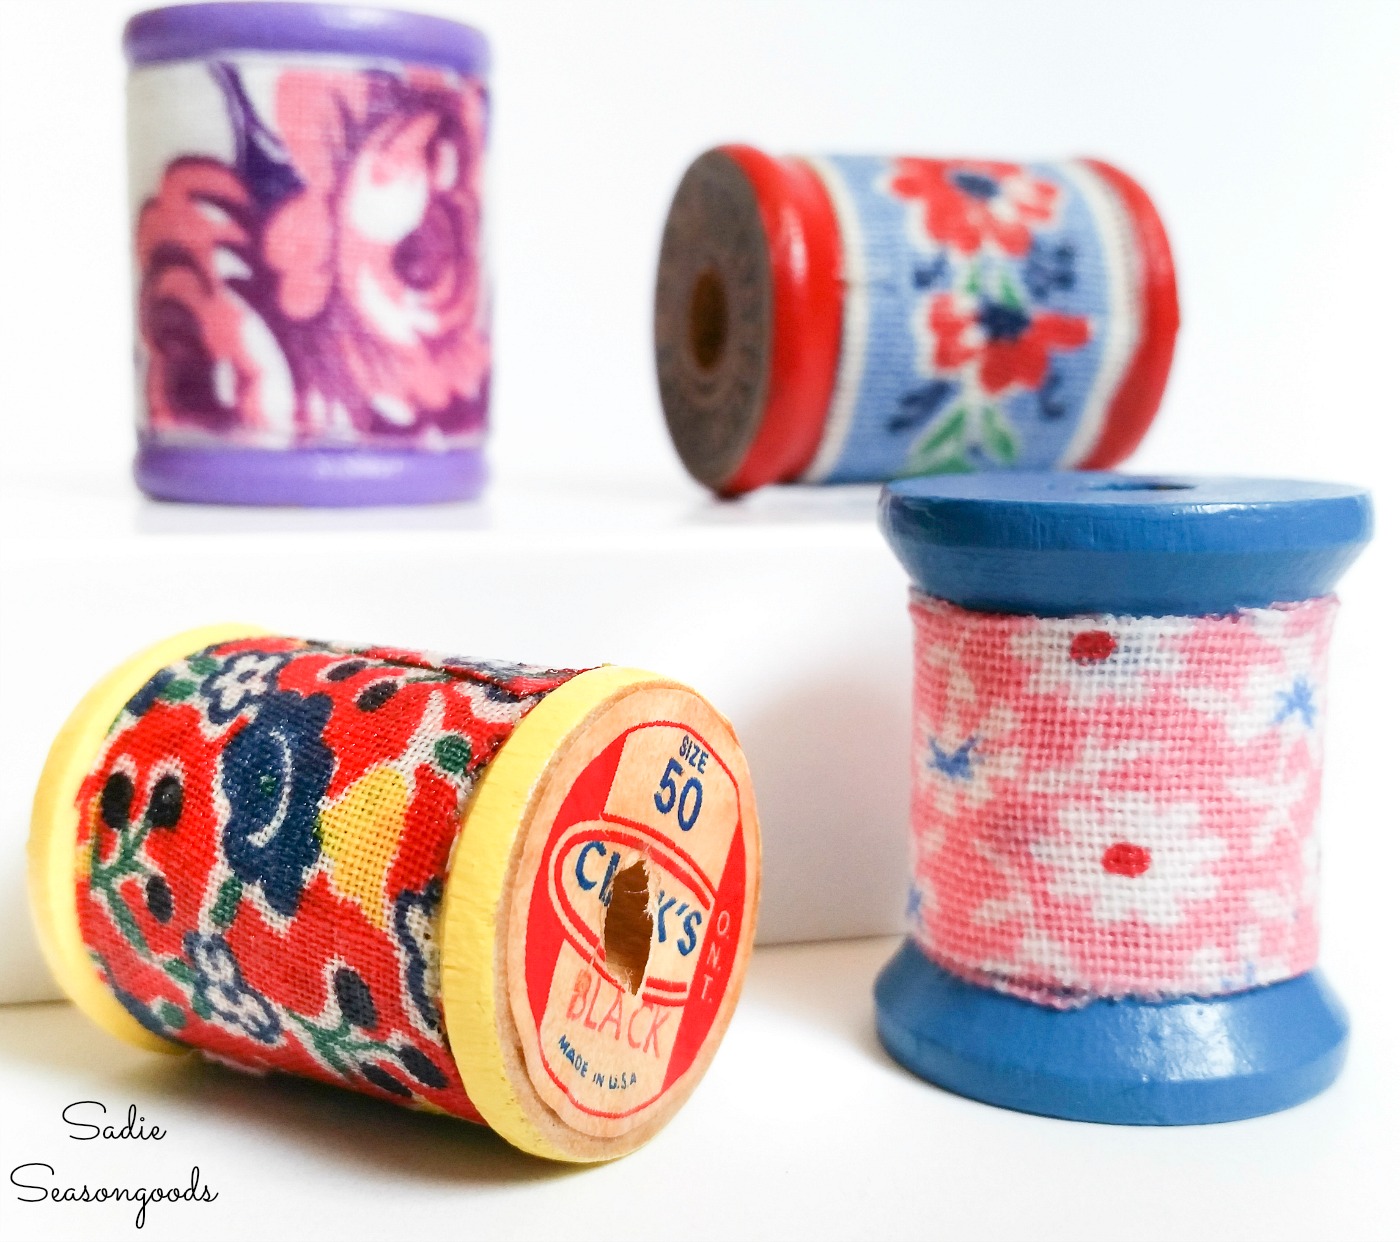 Vintage wooden spools and flour sack fabric as necklace pendants